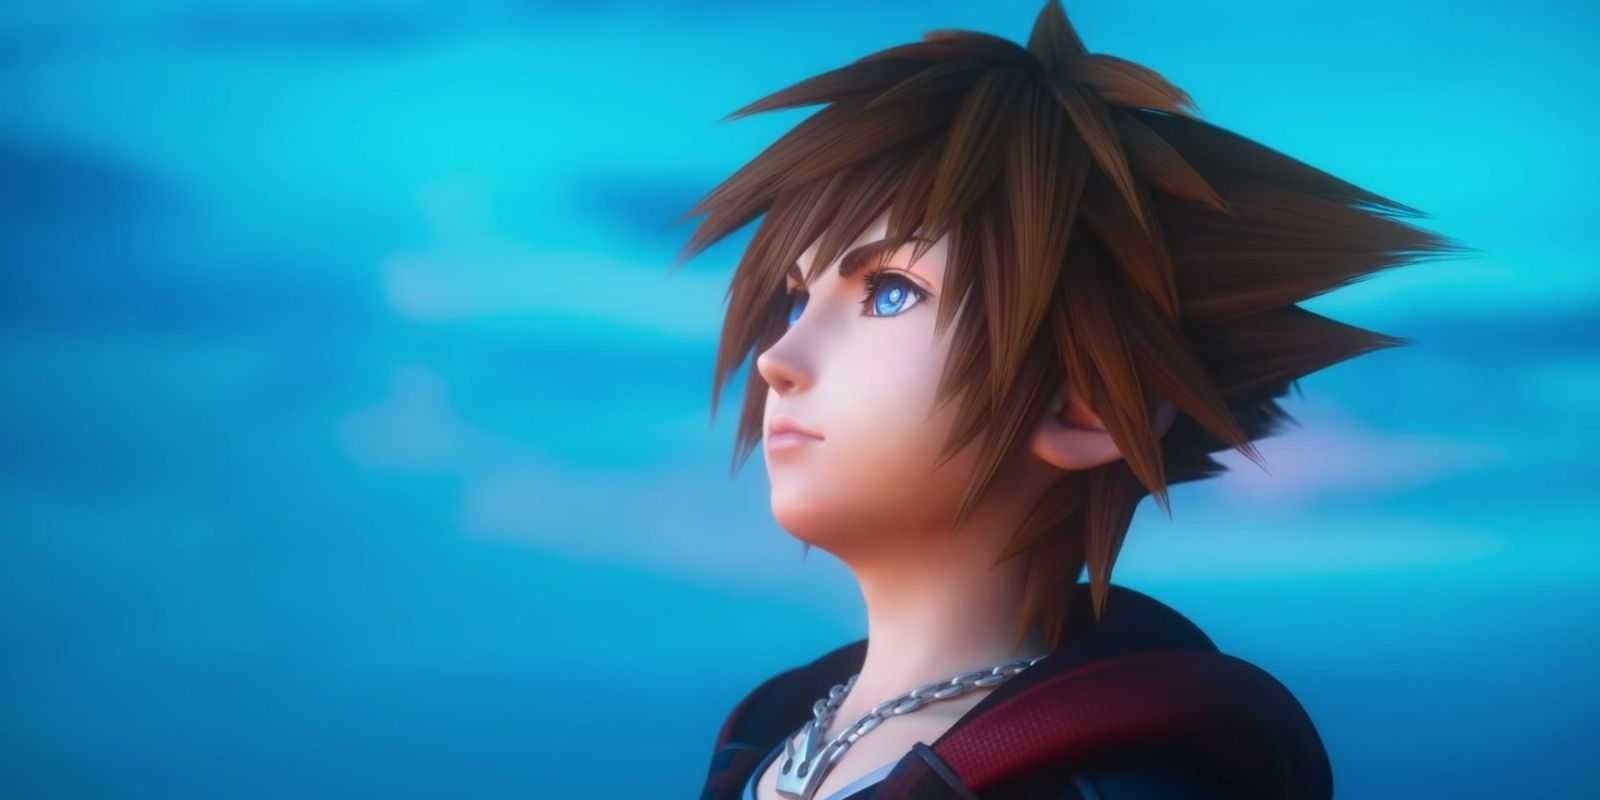 kingdom hearts 3 i want the deluxe edition but dont want to miss out on the box art